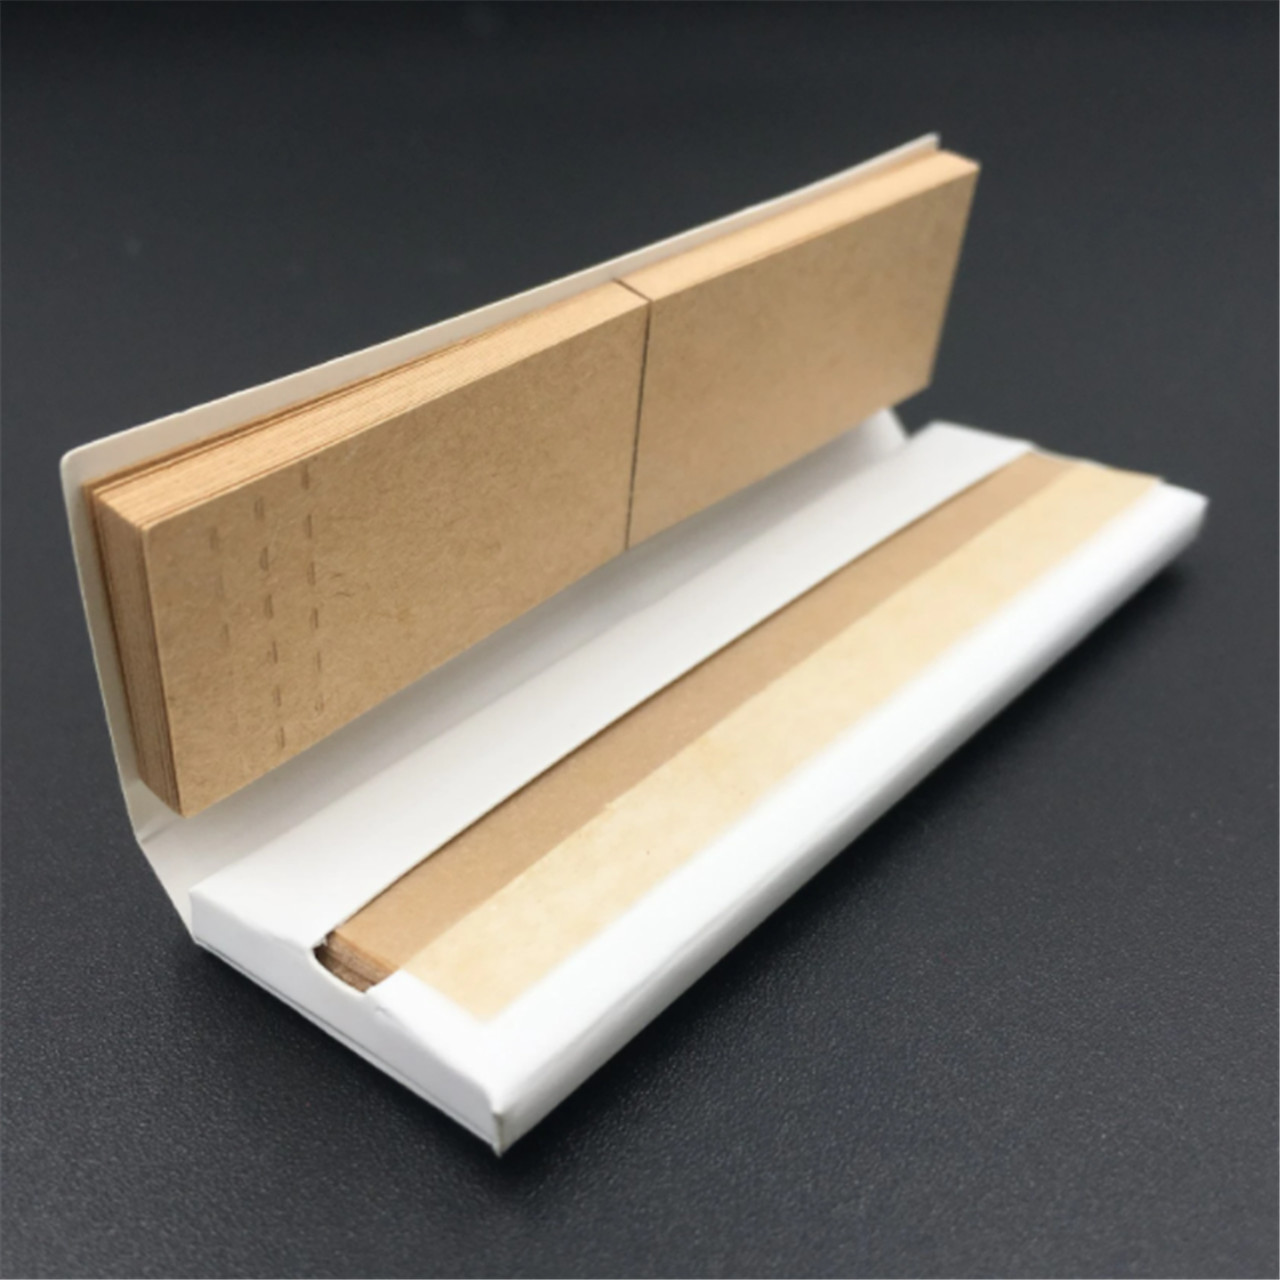 Fixed Competitive Price Disposable Food Containers With Lids - Custom design natural paper cigarette smoking rolling paper 2021 with custom logo – Spring Package